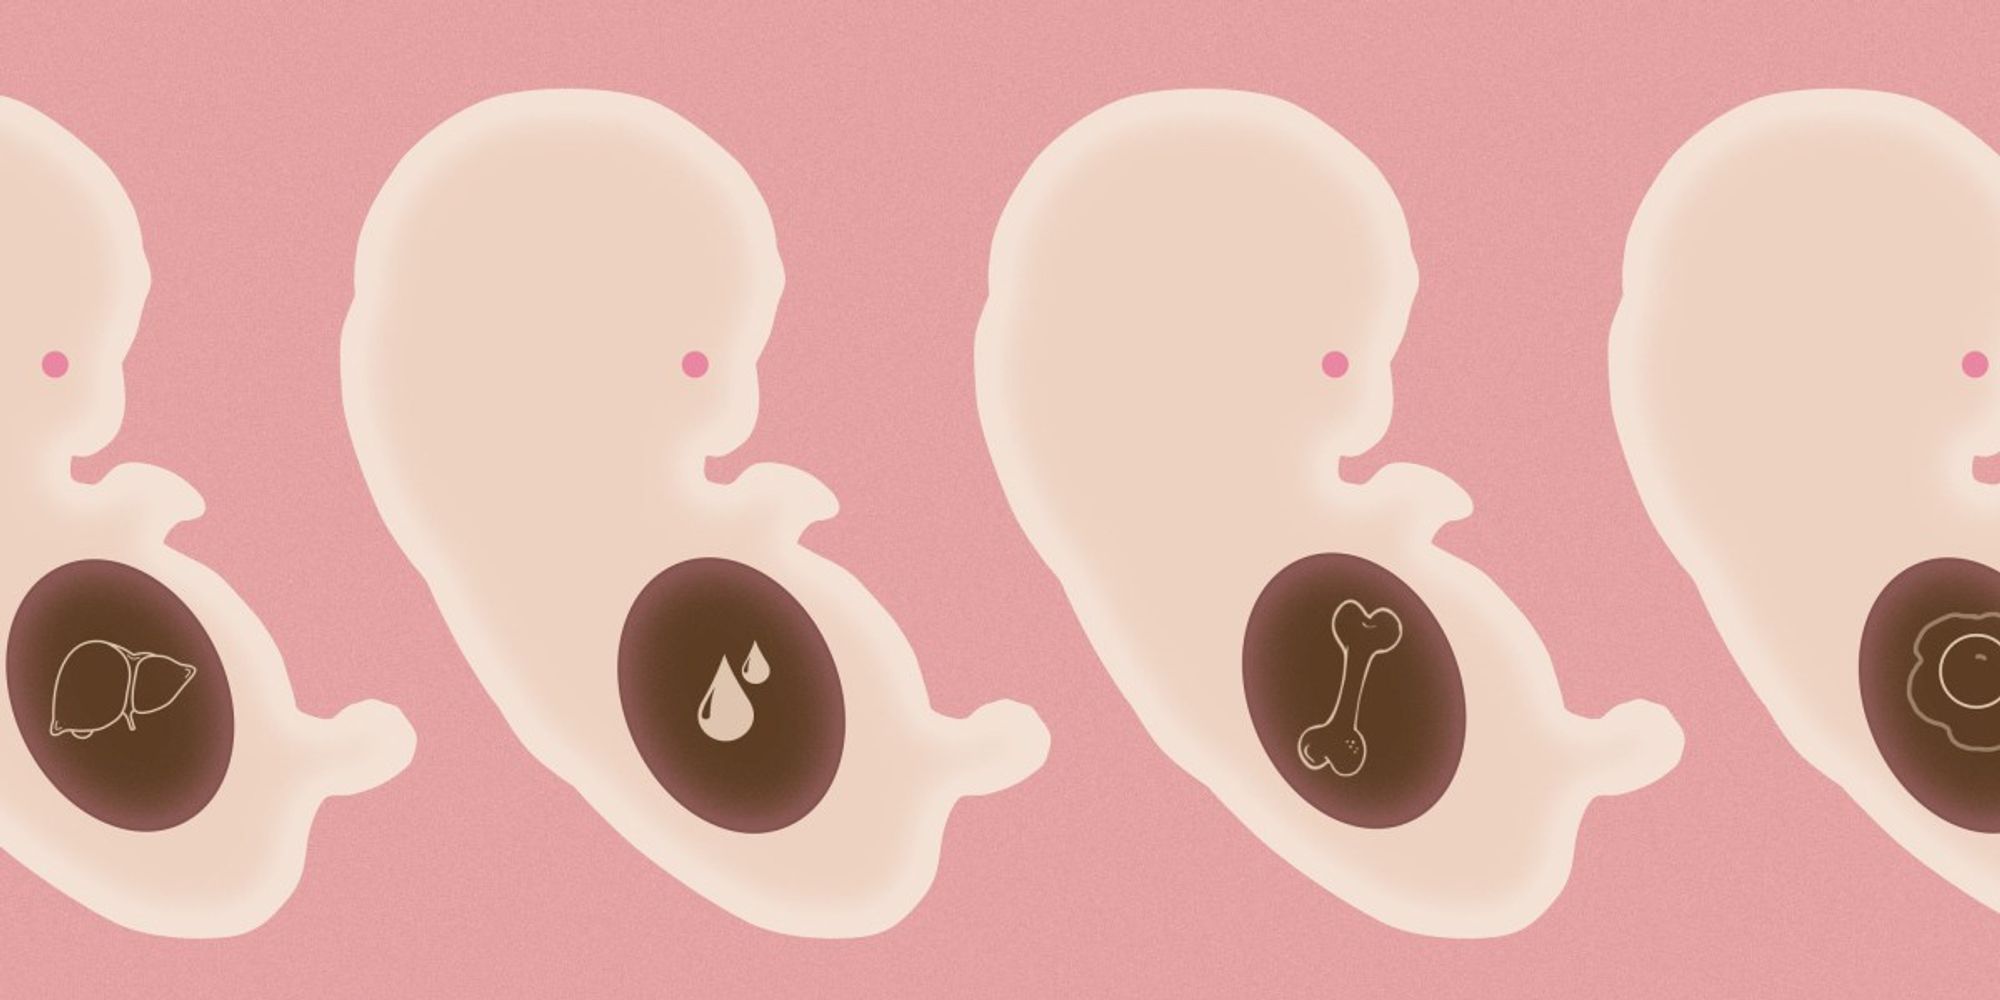 This startup wants to copy you into an embryo for organ harvesting